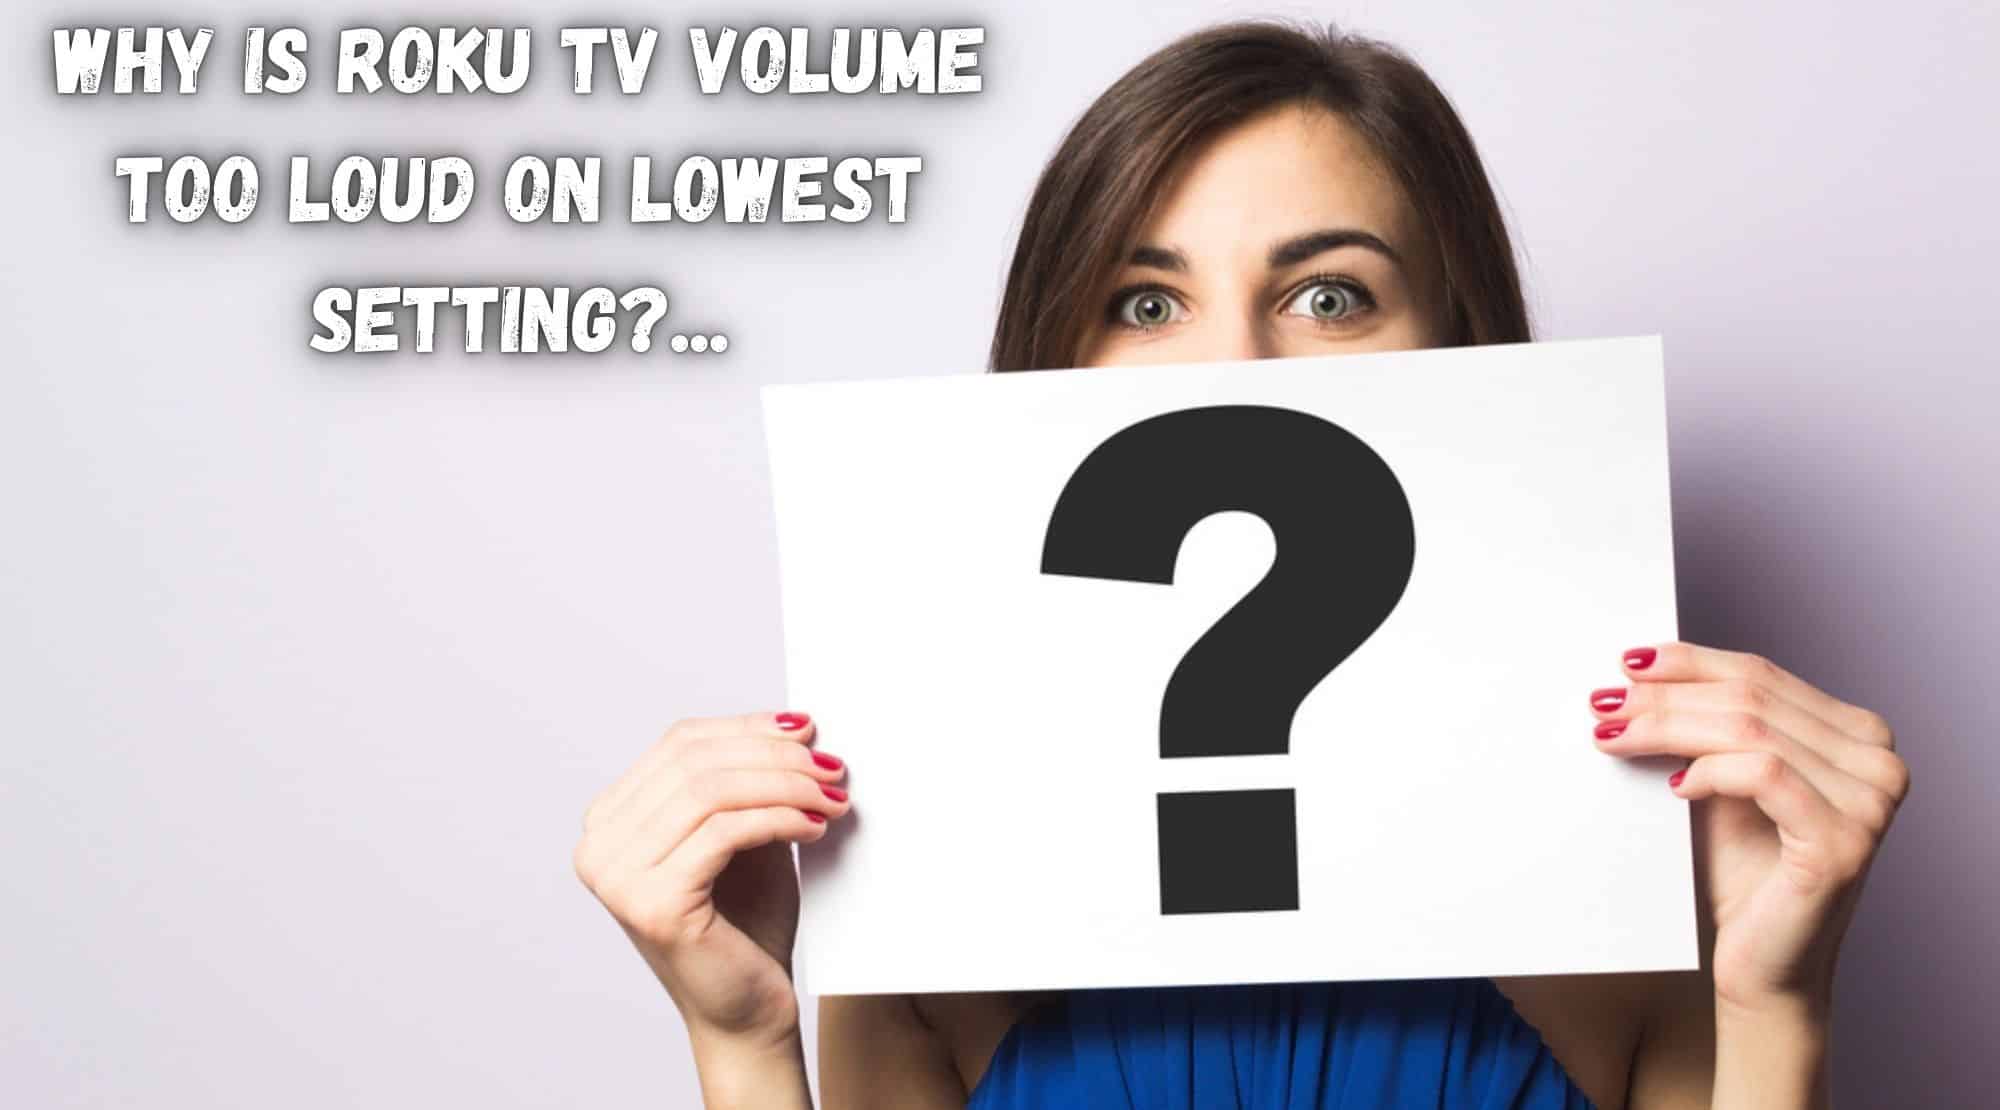 Why Is Roku TV Volume Too Loud On Lowest Setting